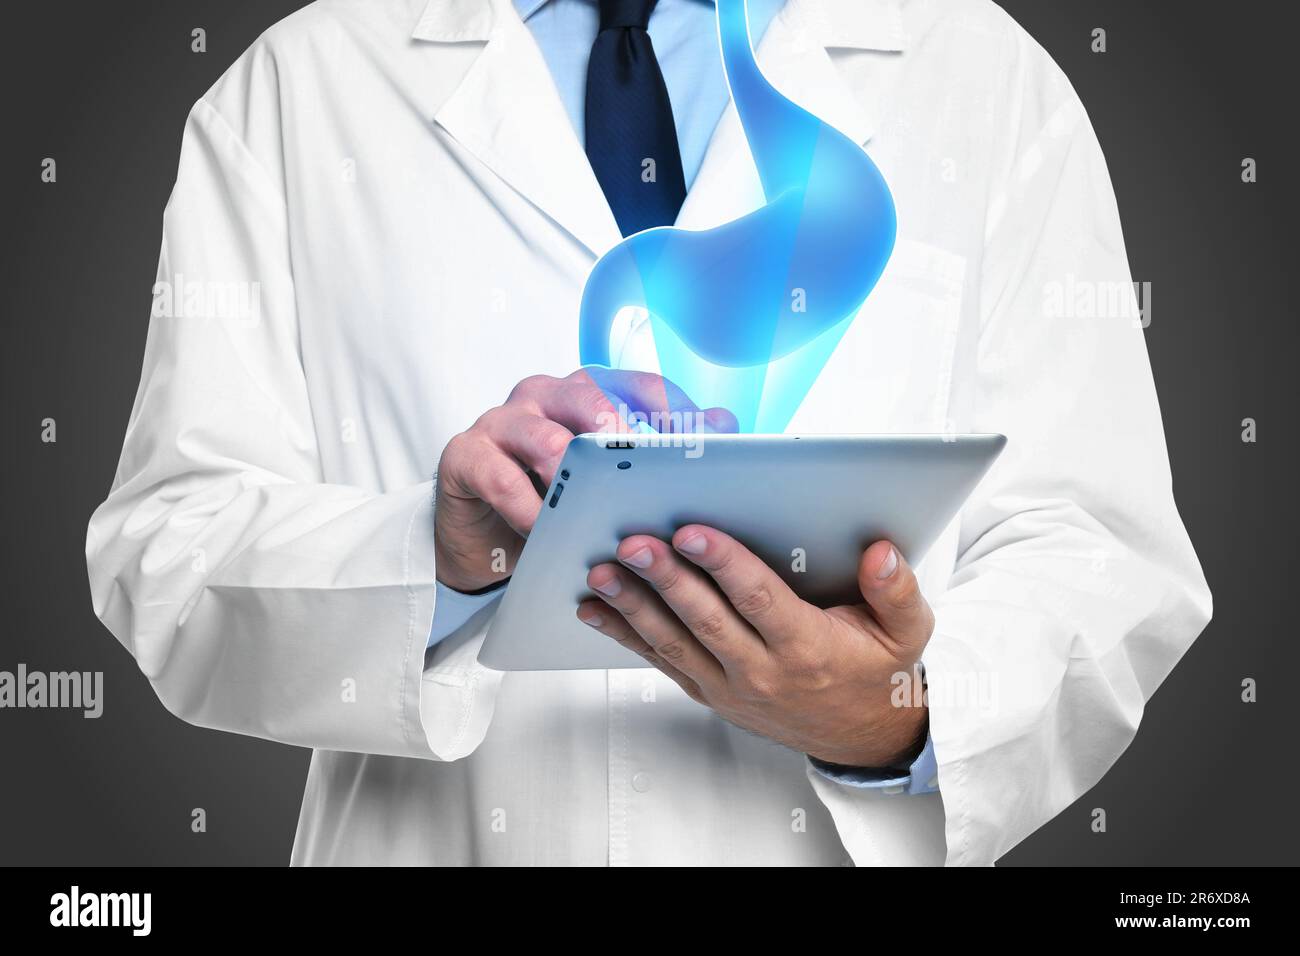 Symptoms and treatment of heartburn and other gastrointestinal diseases. Doctor using tablet on black background, closeup. Stomach illustration over d Stock Photo